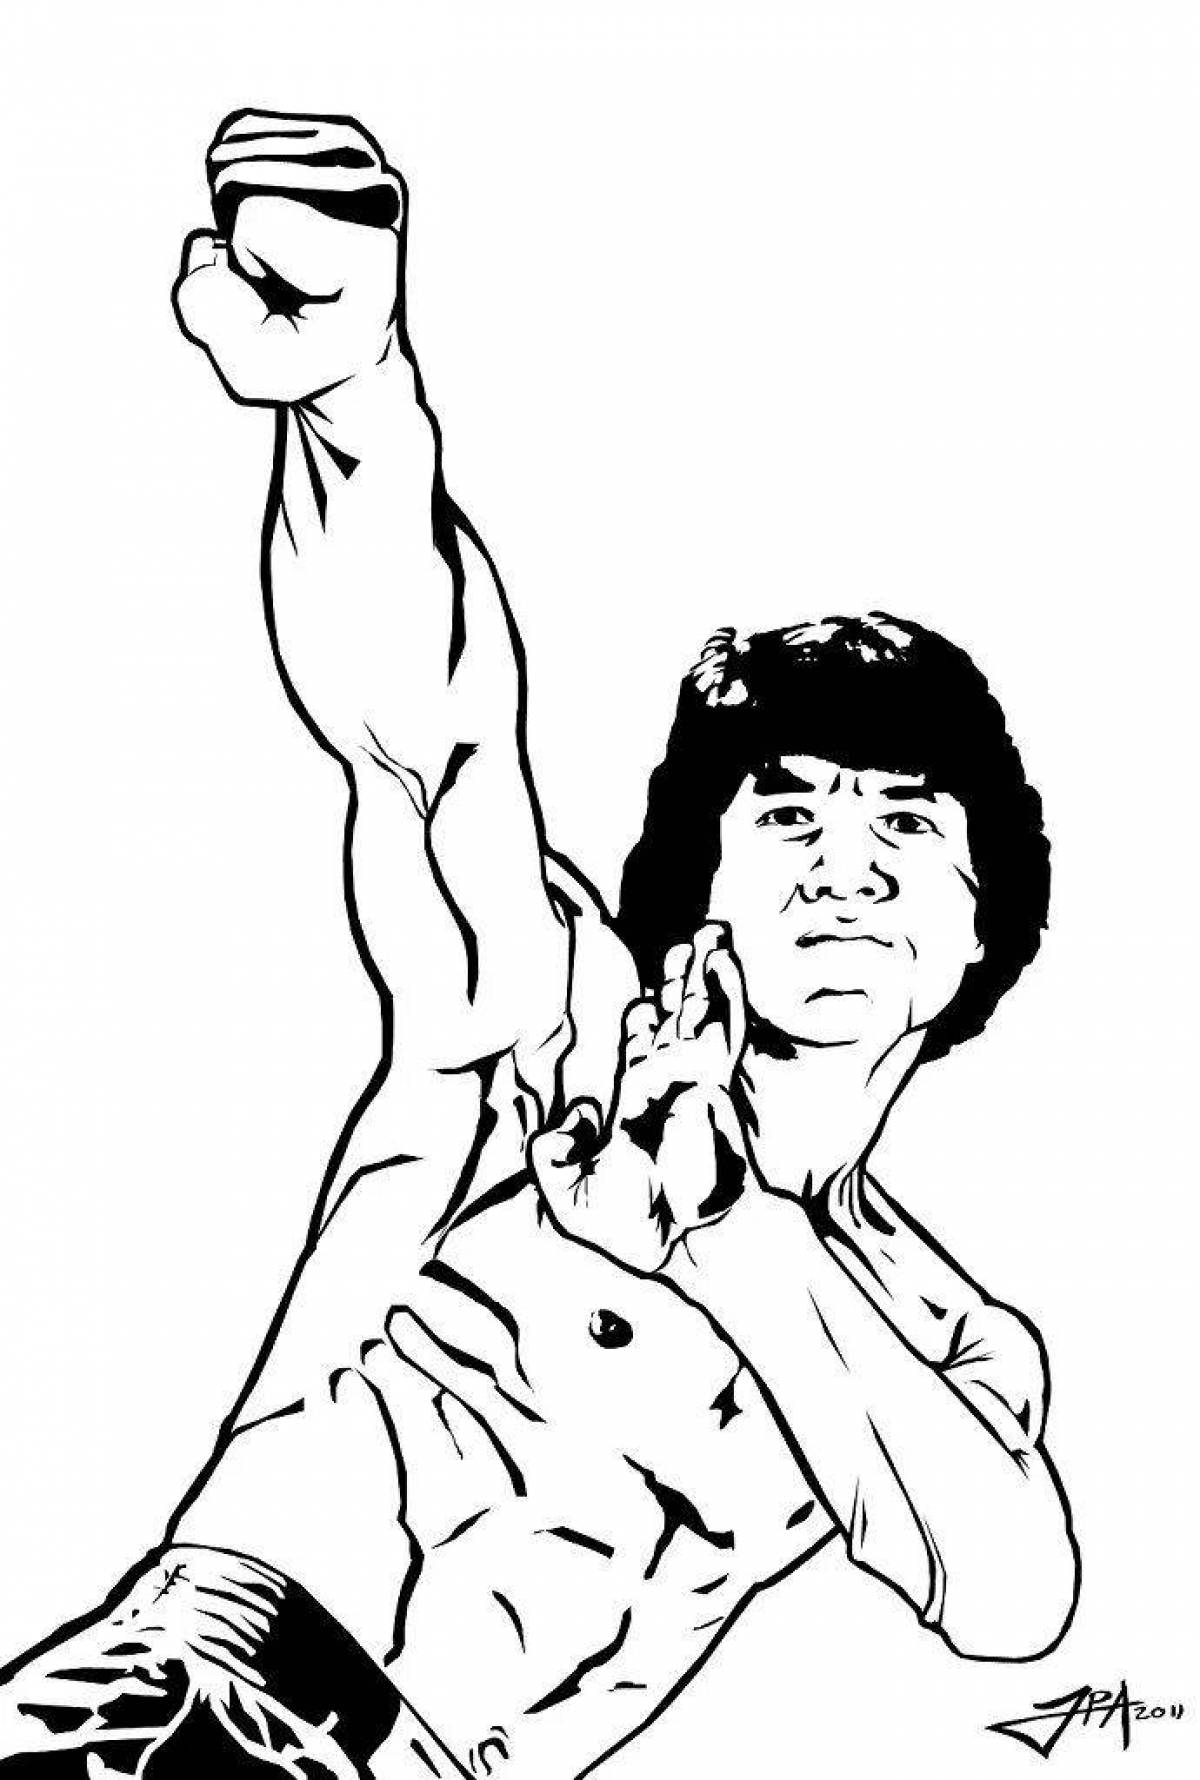 Jackie chan's amazing coloring page